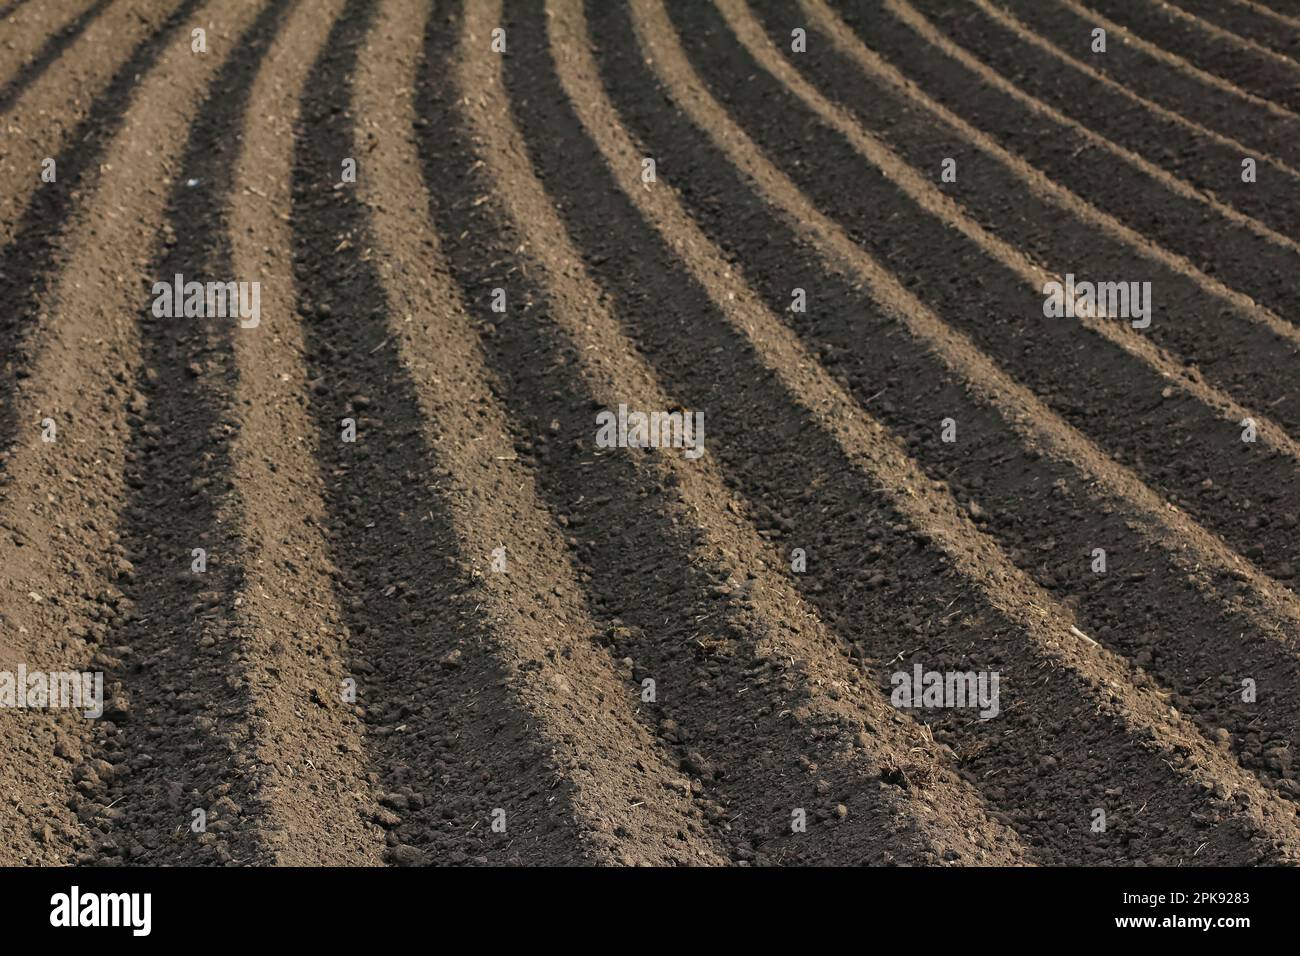 Furrows in a fertile and freshly plowed field during sowing period Stock Photo